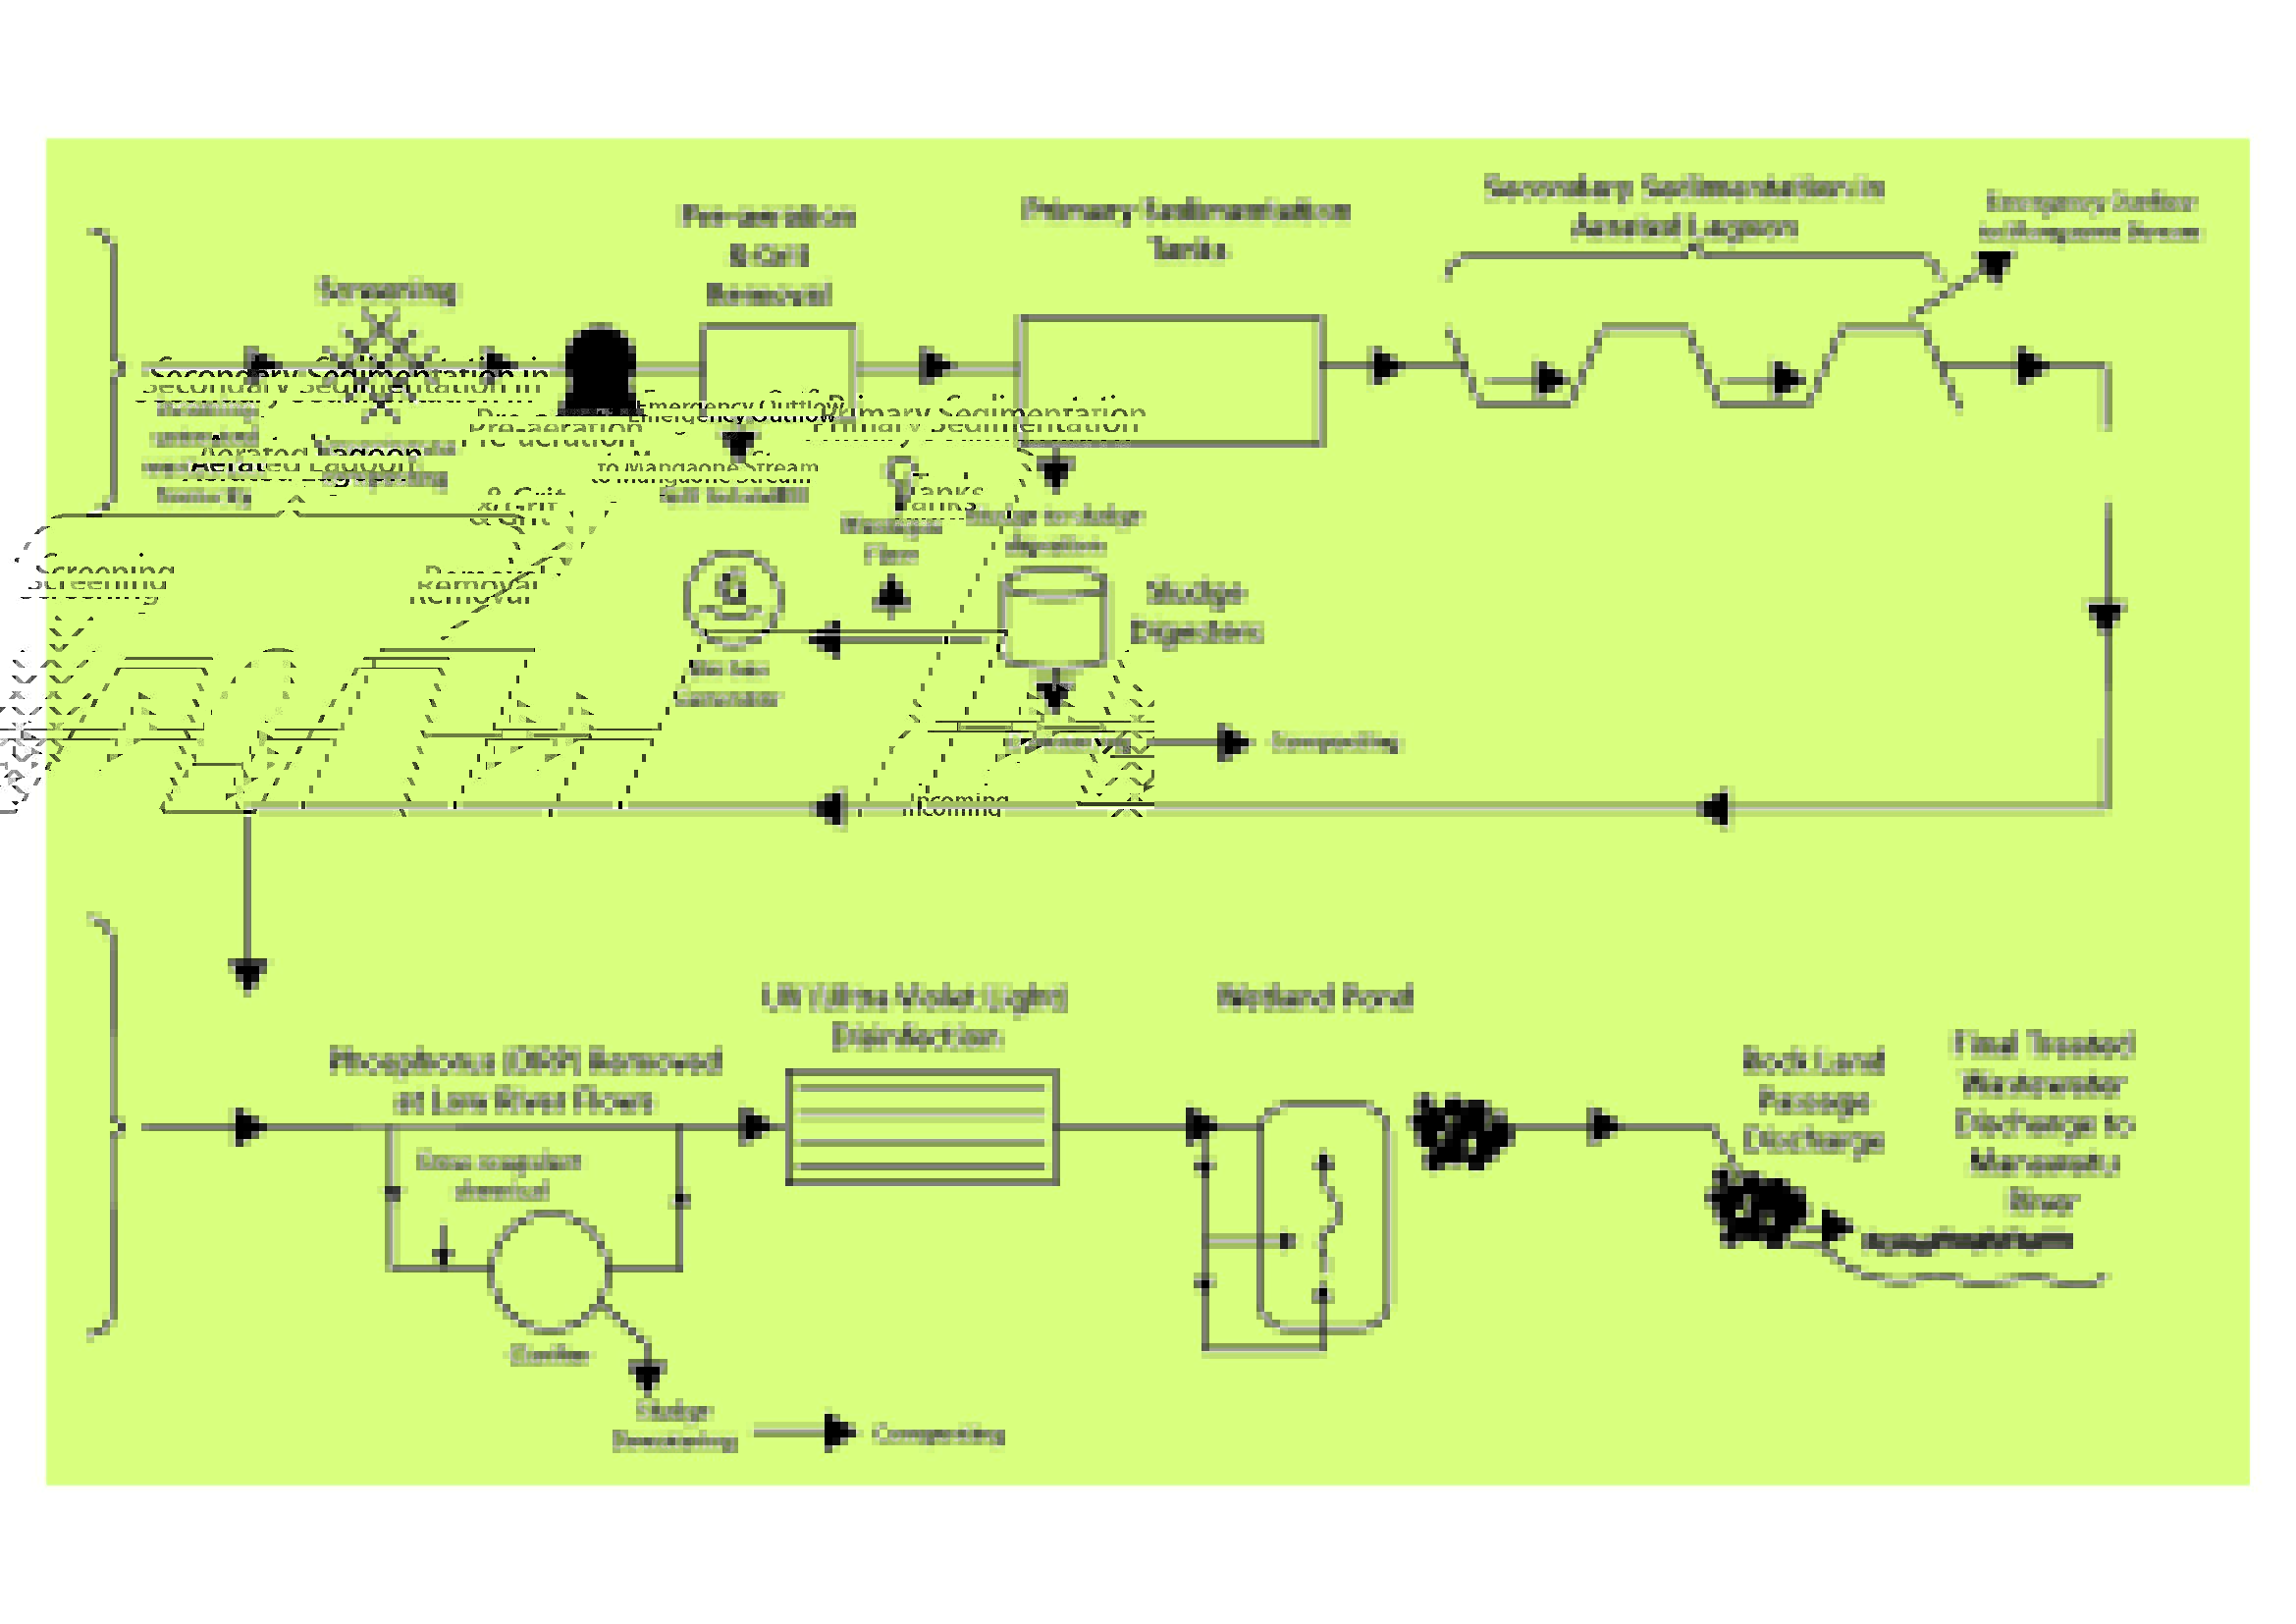 Diagram showing the process for treating Palmerston North wastewater before it is discharged into Manawatū River.